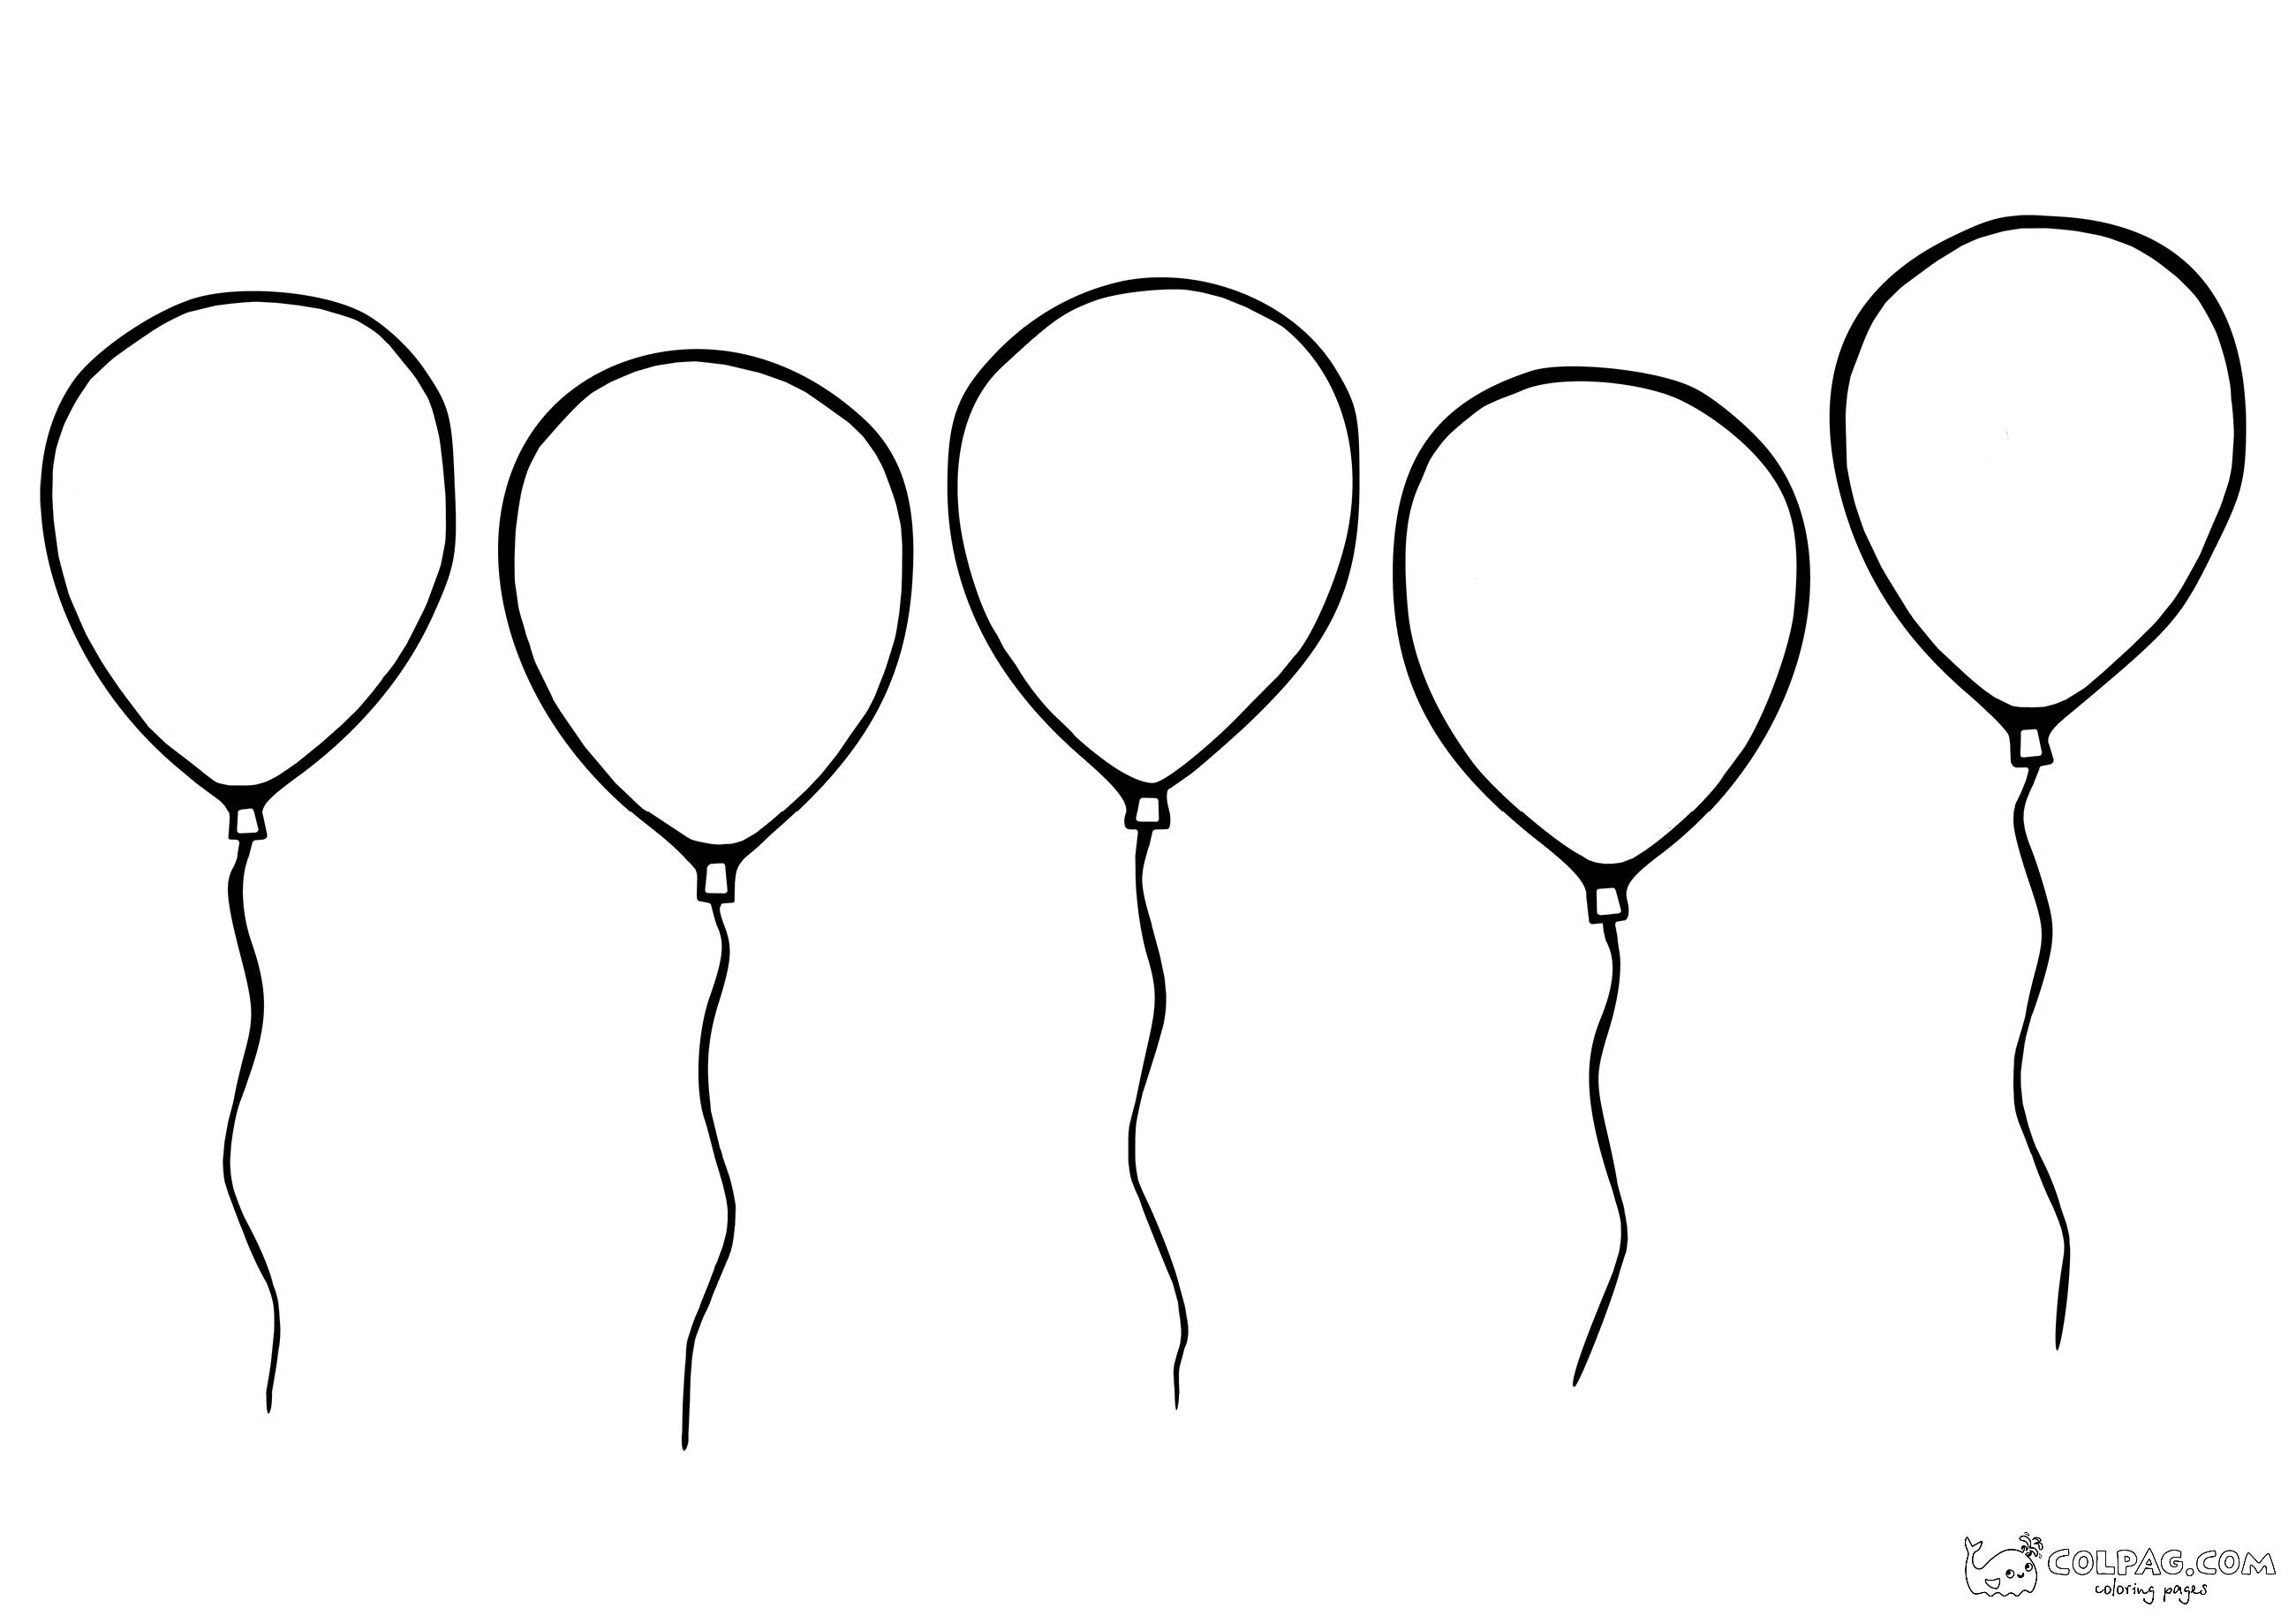 30-five-huge-flying-baloons-coloring-page-colpag-30